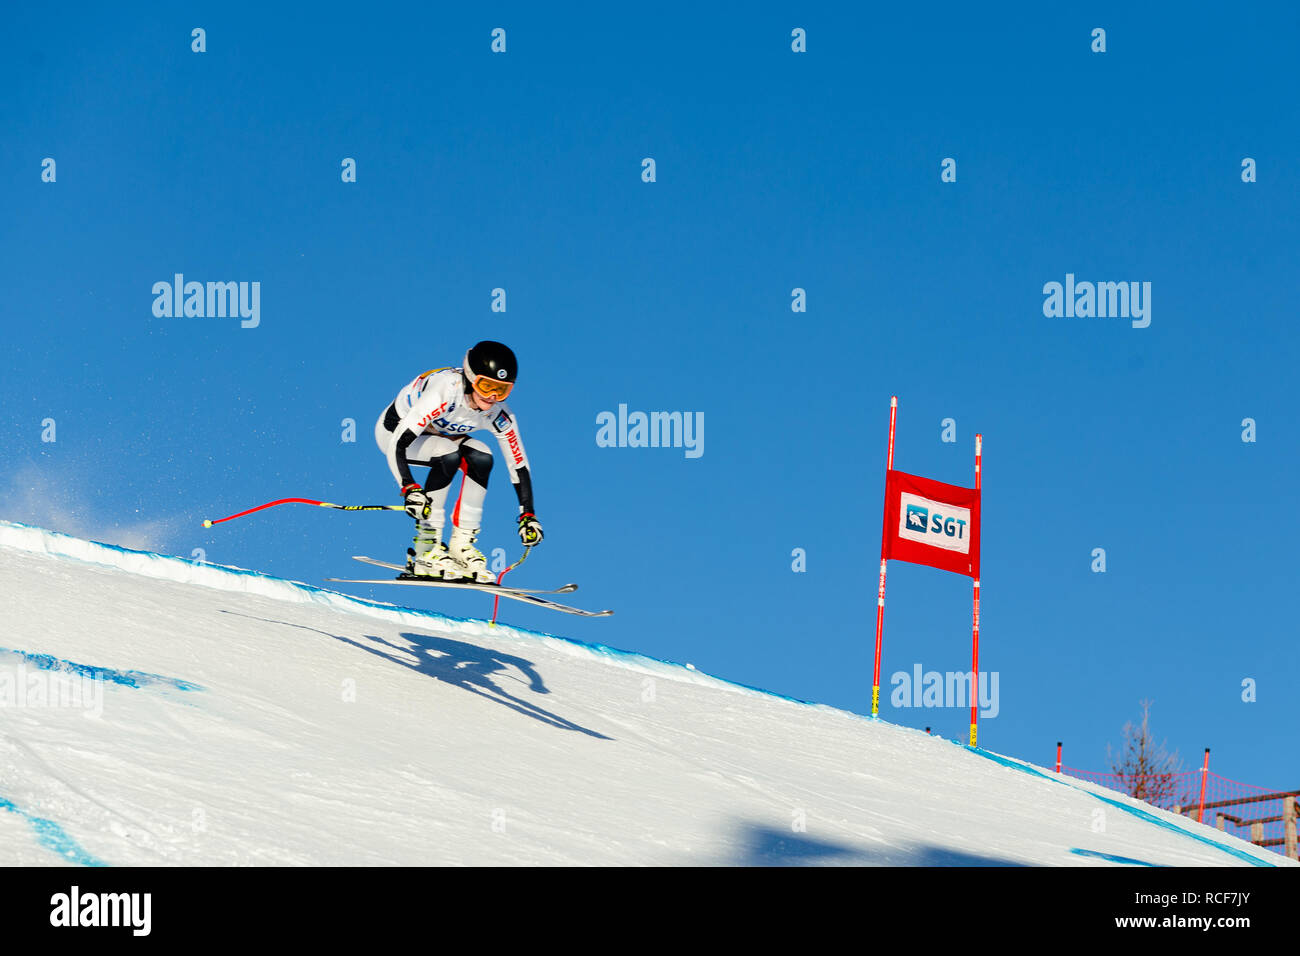 Magnitogorsk, Russia - December 18, 2018: women athlete racer in downhill skiing during National championship alpine skiing Stock Photo